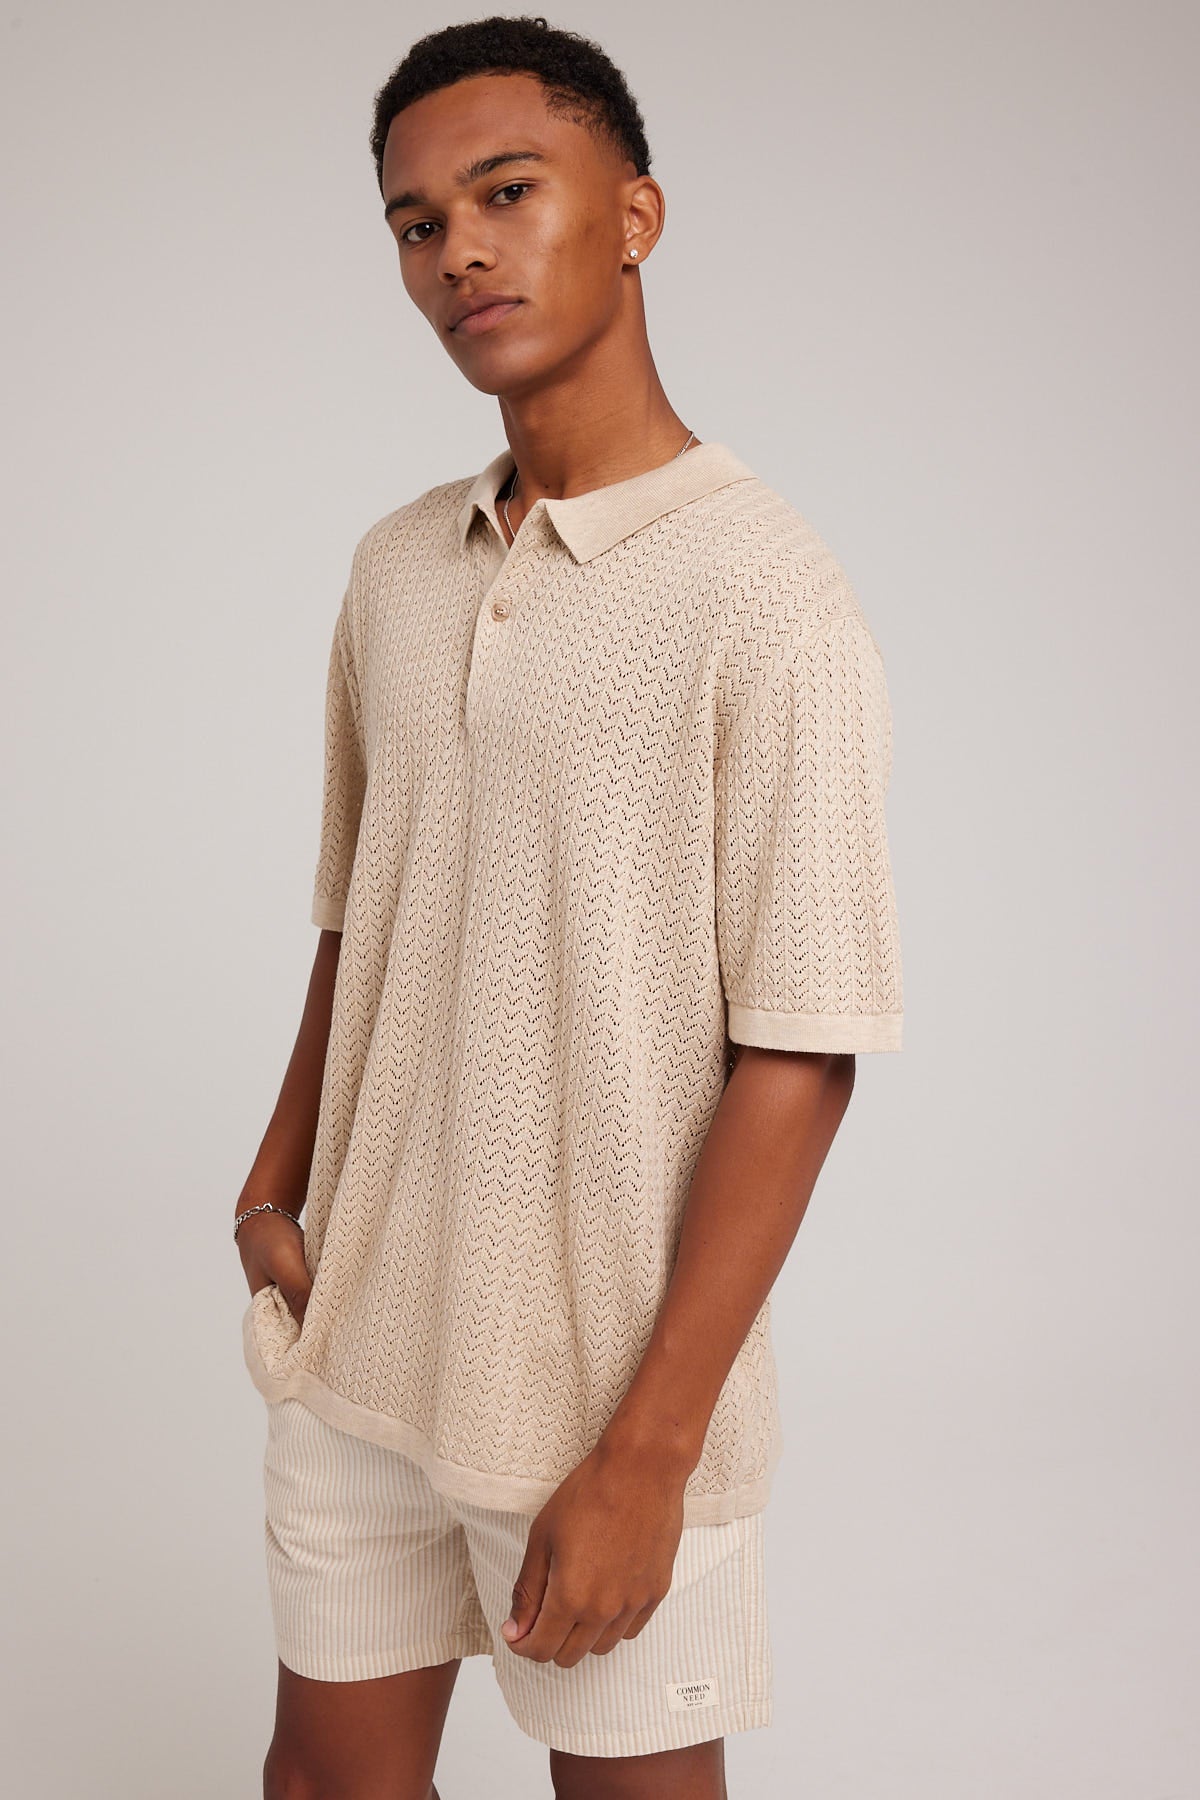 Barney Cools Knit Polo Shirt Sandstone